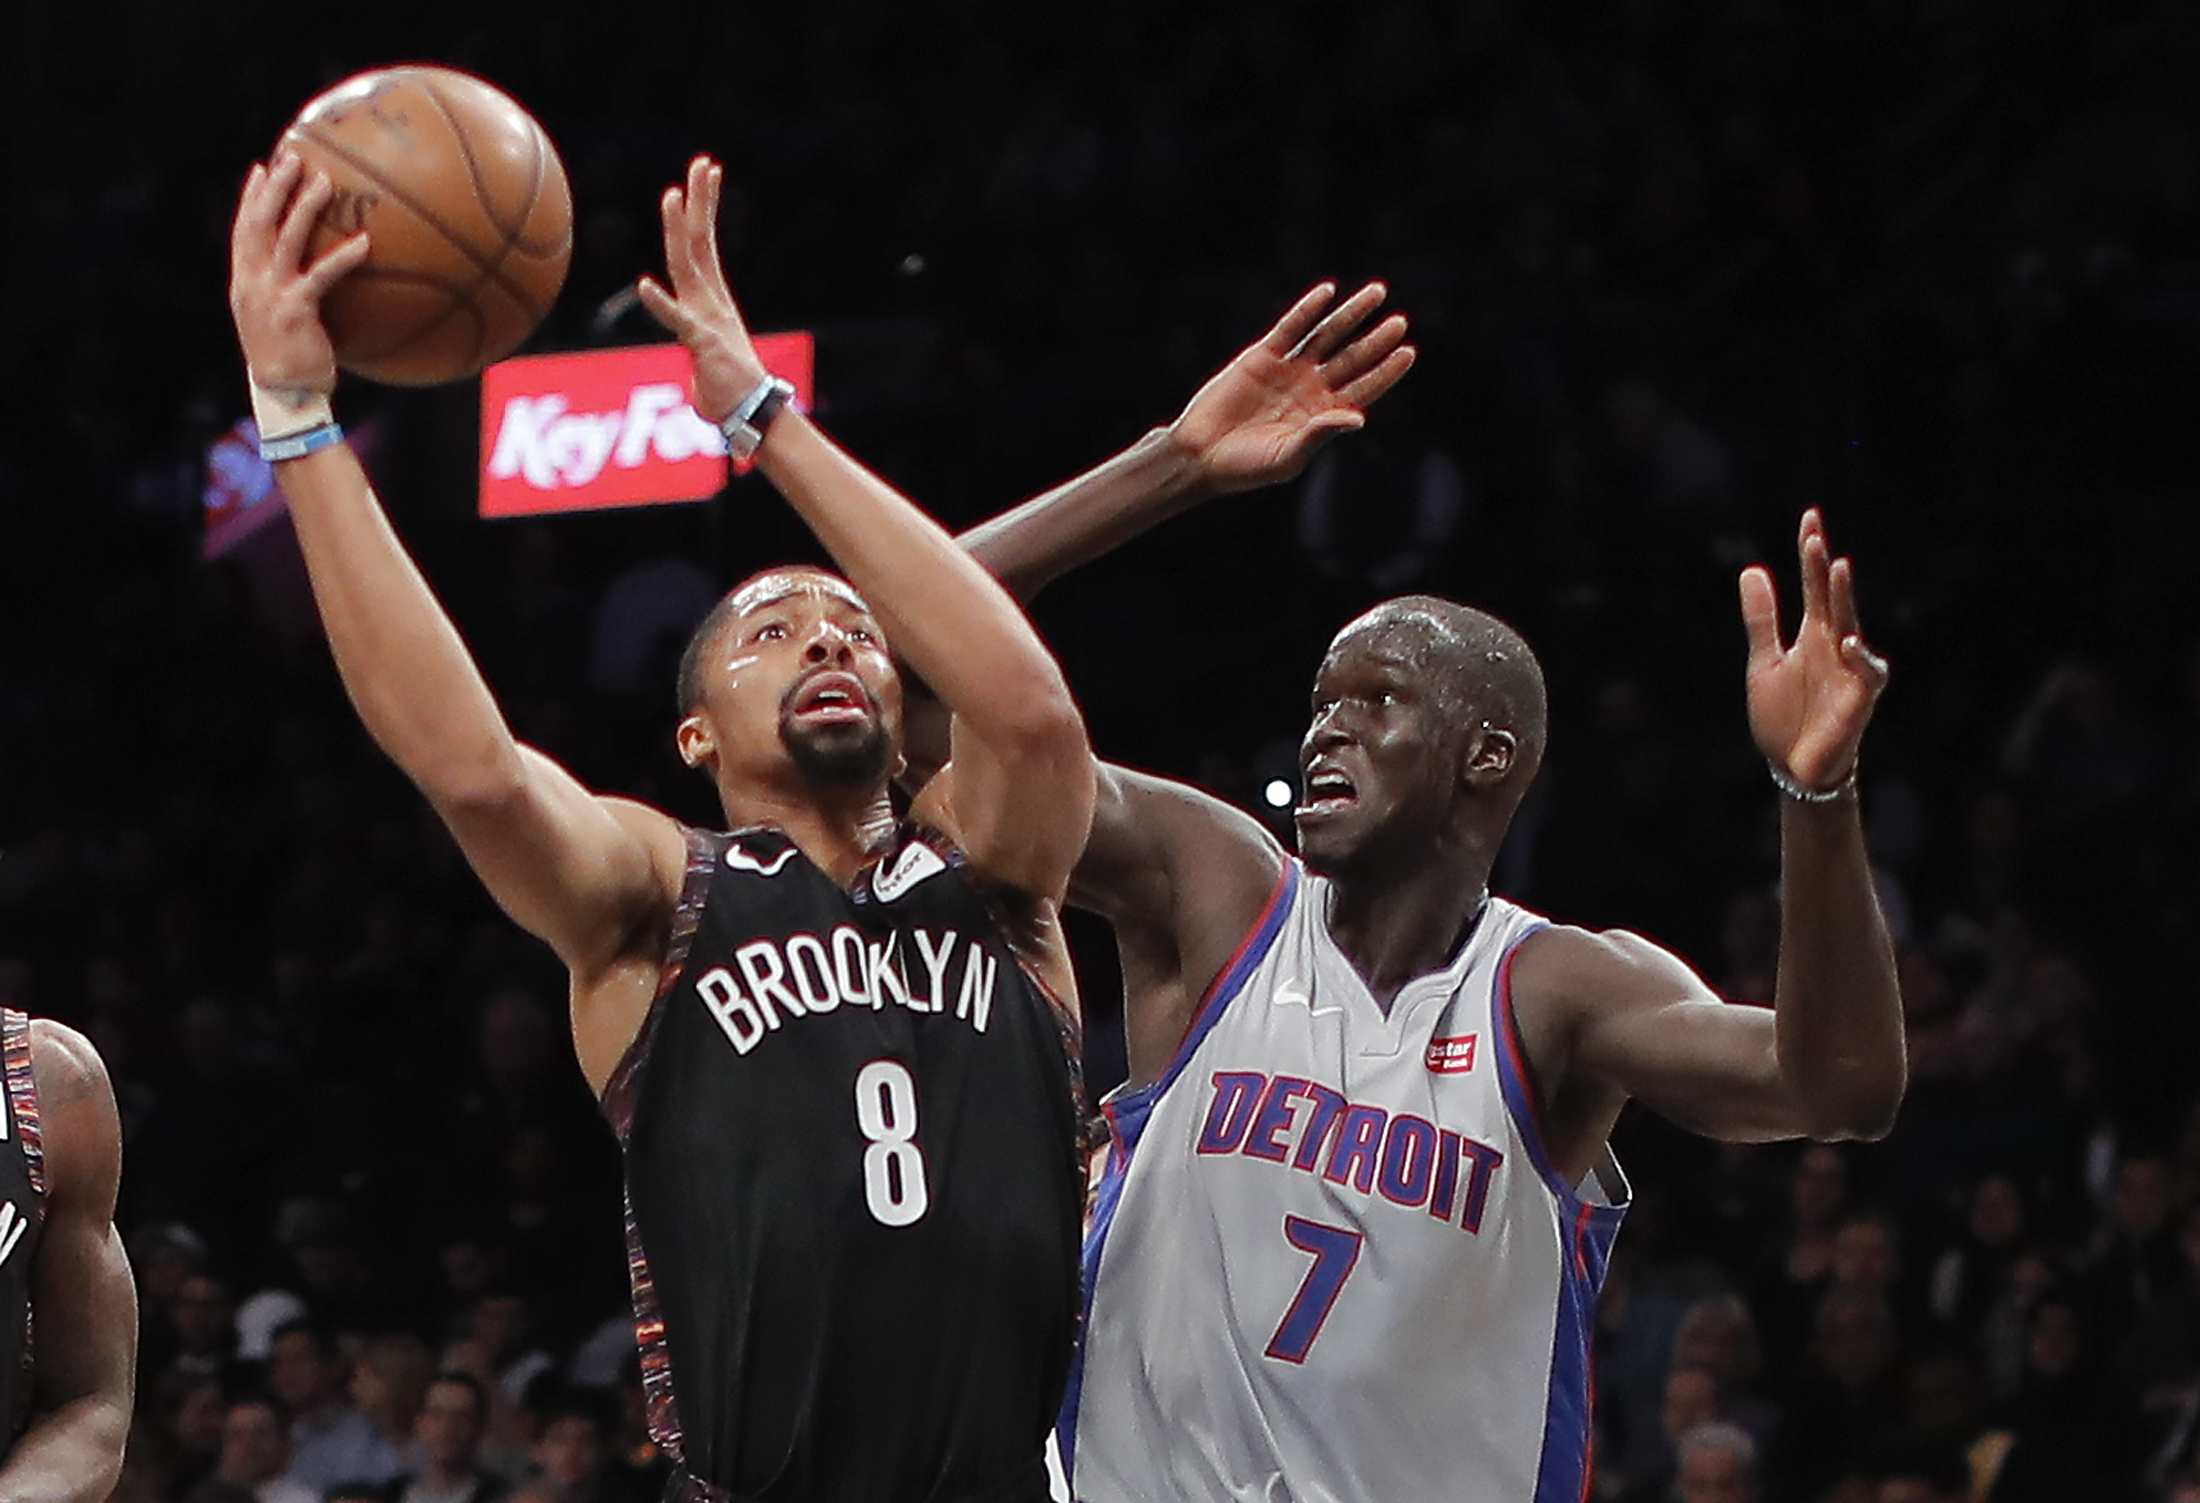 Spencer Dinwiddie and the rest of the Brooklyn Nets prepared for their seven-game road trip by dominating the Detroit Pistons from start to finish in their key Eastern Conference showdown Monday night at Barclays Center. (AP Photo/Julie Jacobson)